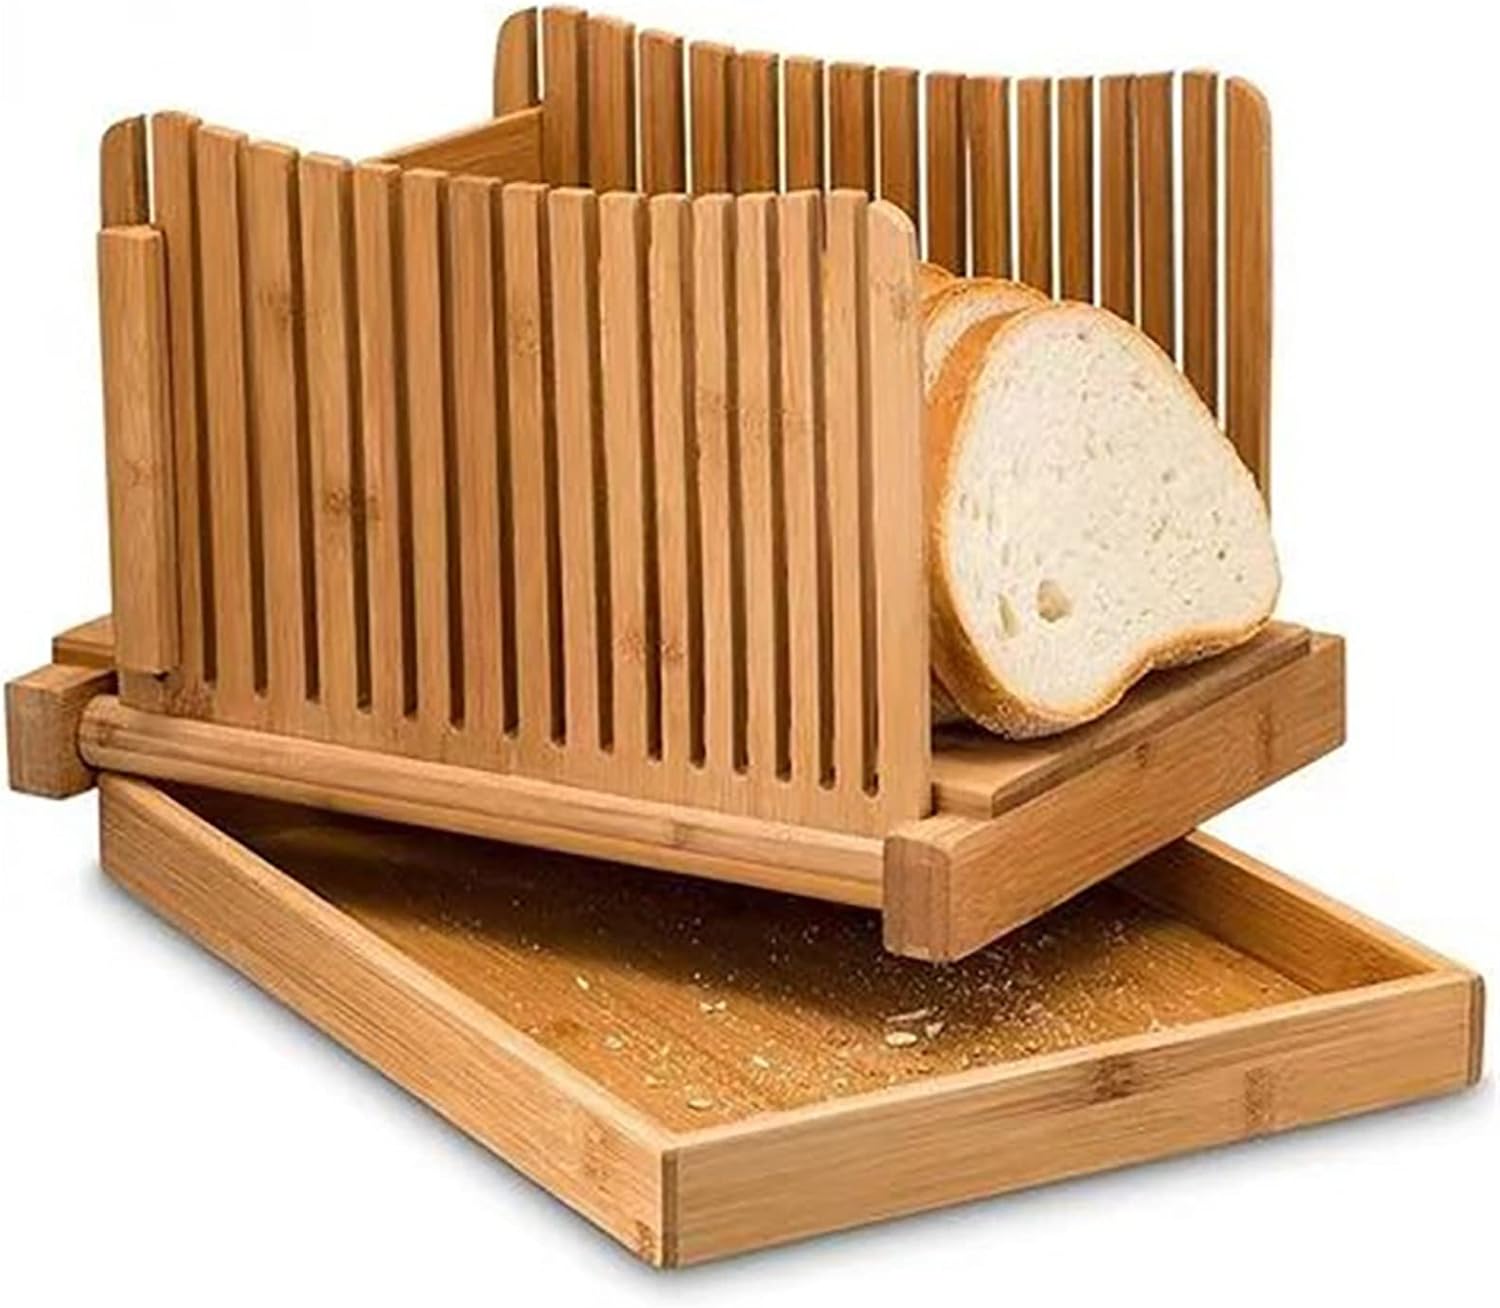 Generic iSH09-M416830mn Foldable Bread Slicer For Homemade Bread Loaf,Bamboo  Bread Slicer Compact Cutting Guide With Crumb Tray, Homemade Bread, Cake